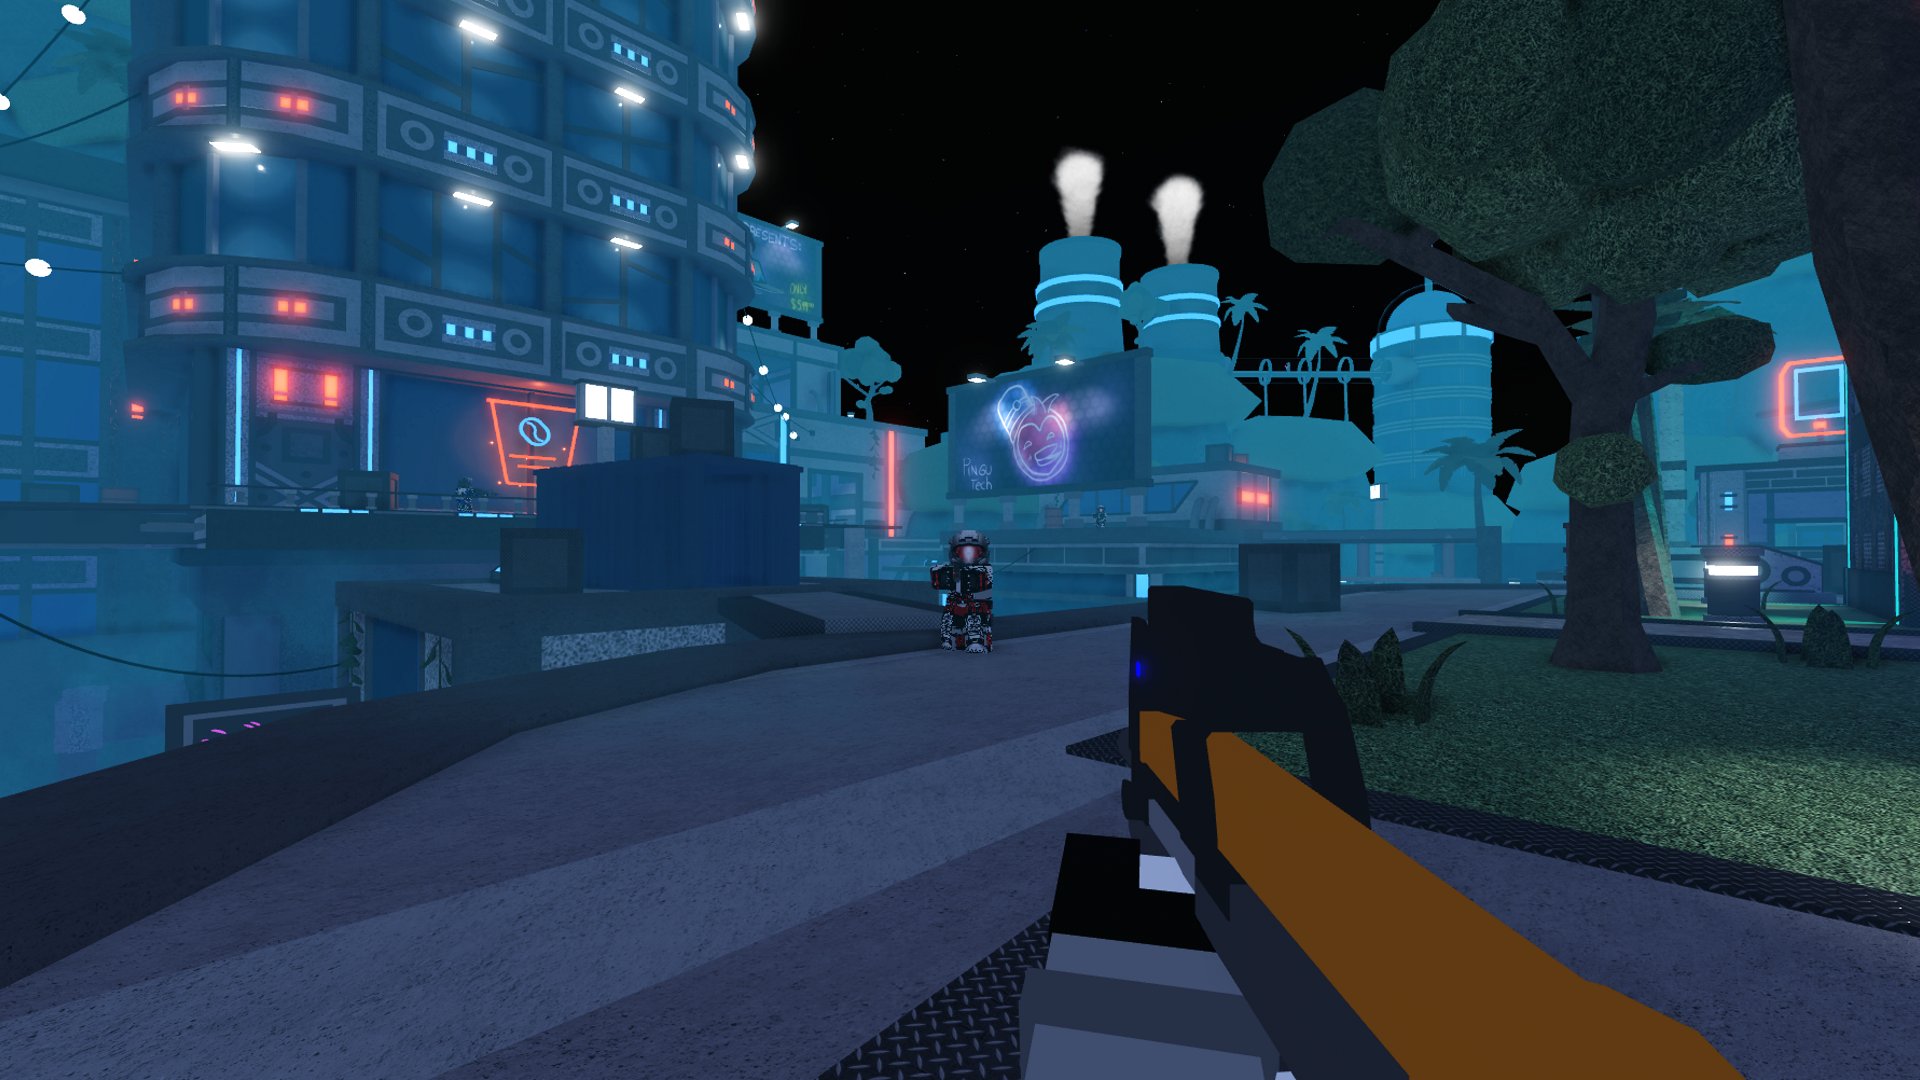 Typicaltype On Twitter Introducing Energy Assault A New Futuristic Roblox Fps That I Ve Being Working On With Realsteeleagle And Some Talented Map Makers Coming Soon Https T Co 2izwtgm867 Https T Co X64p7c4rfl - roblox avatar assaulted